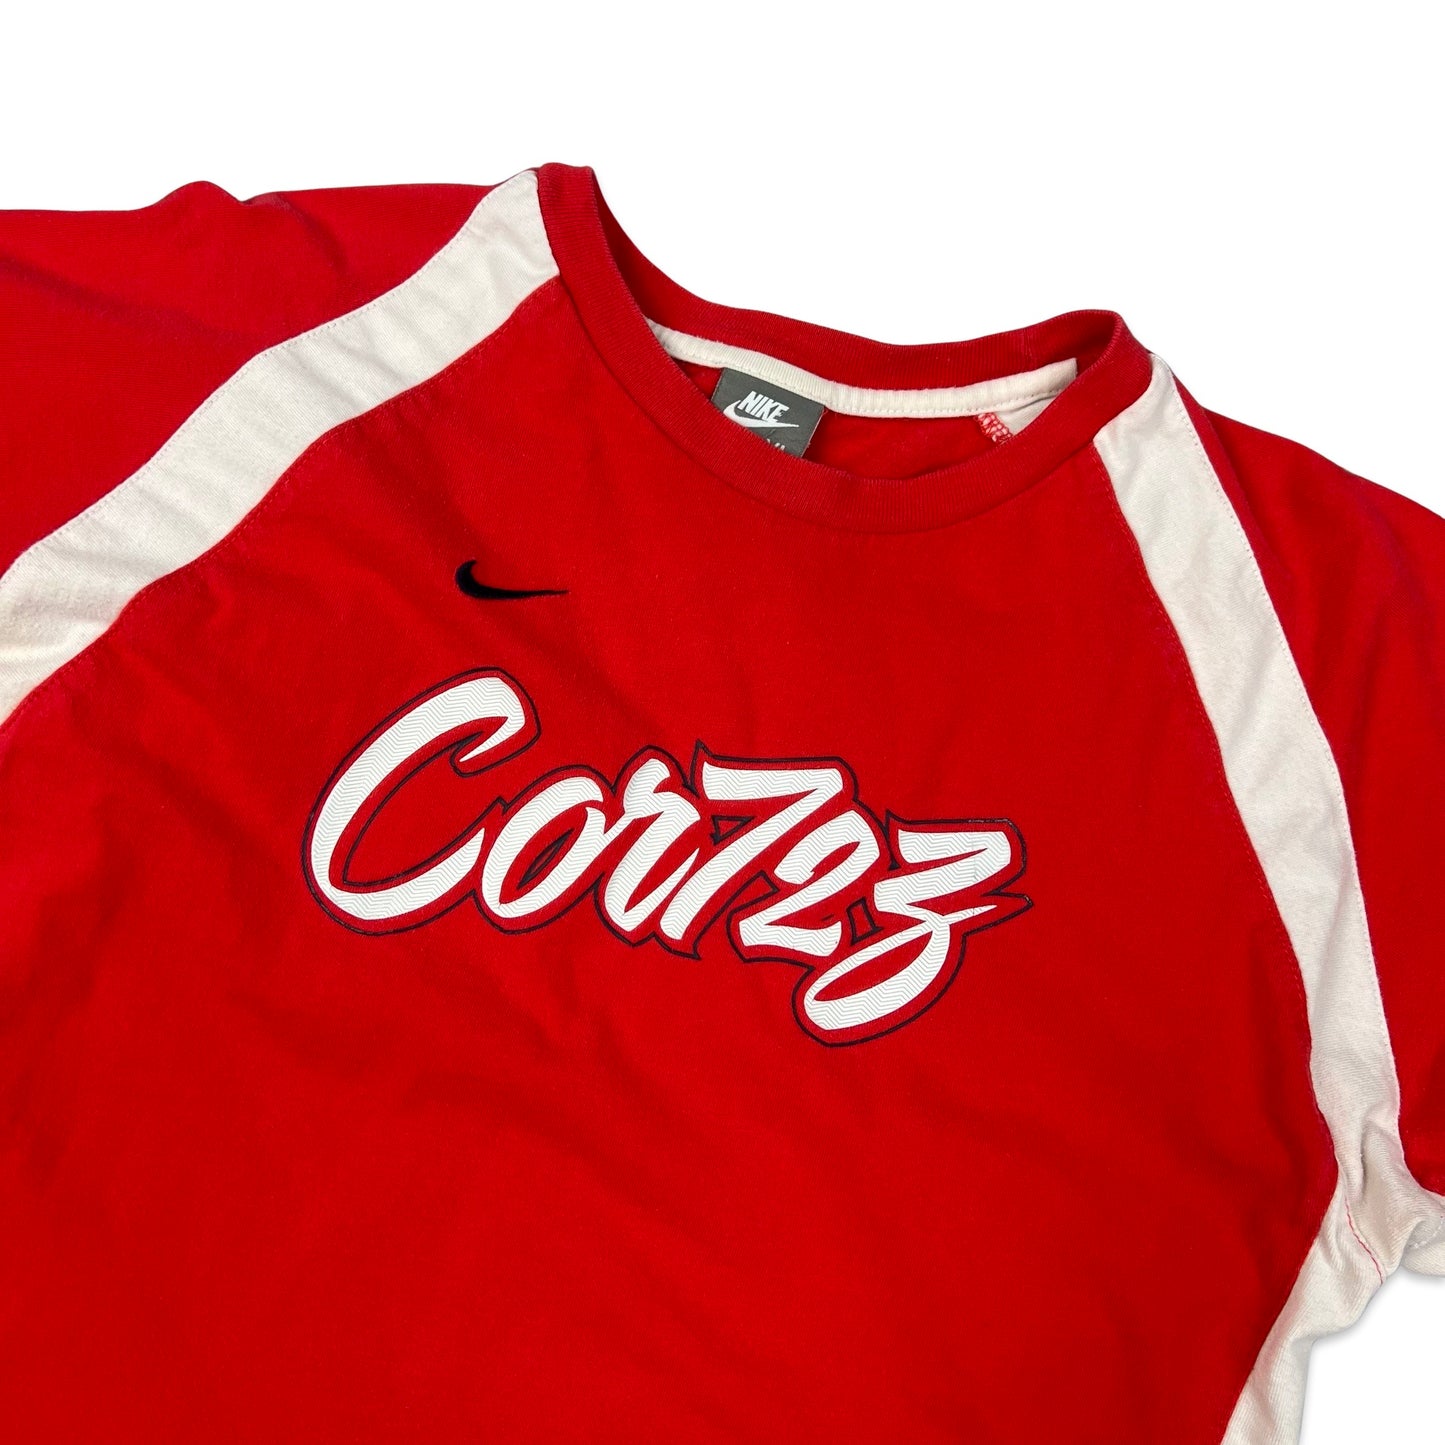 Nike Cortez Red & White Spell Out Tee XS S